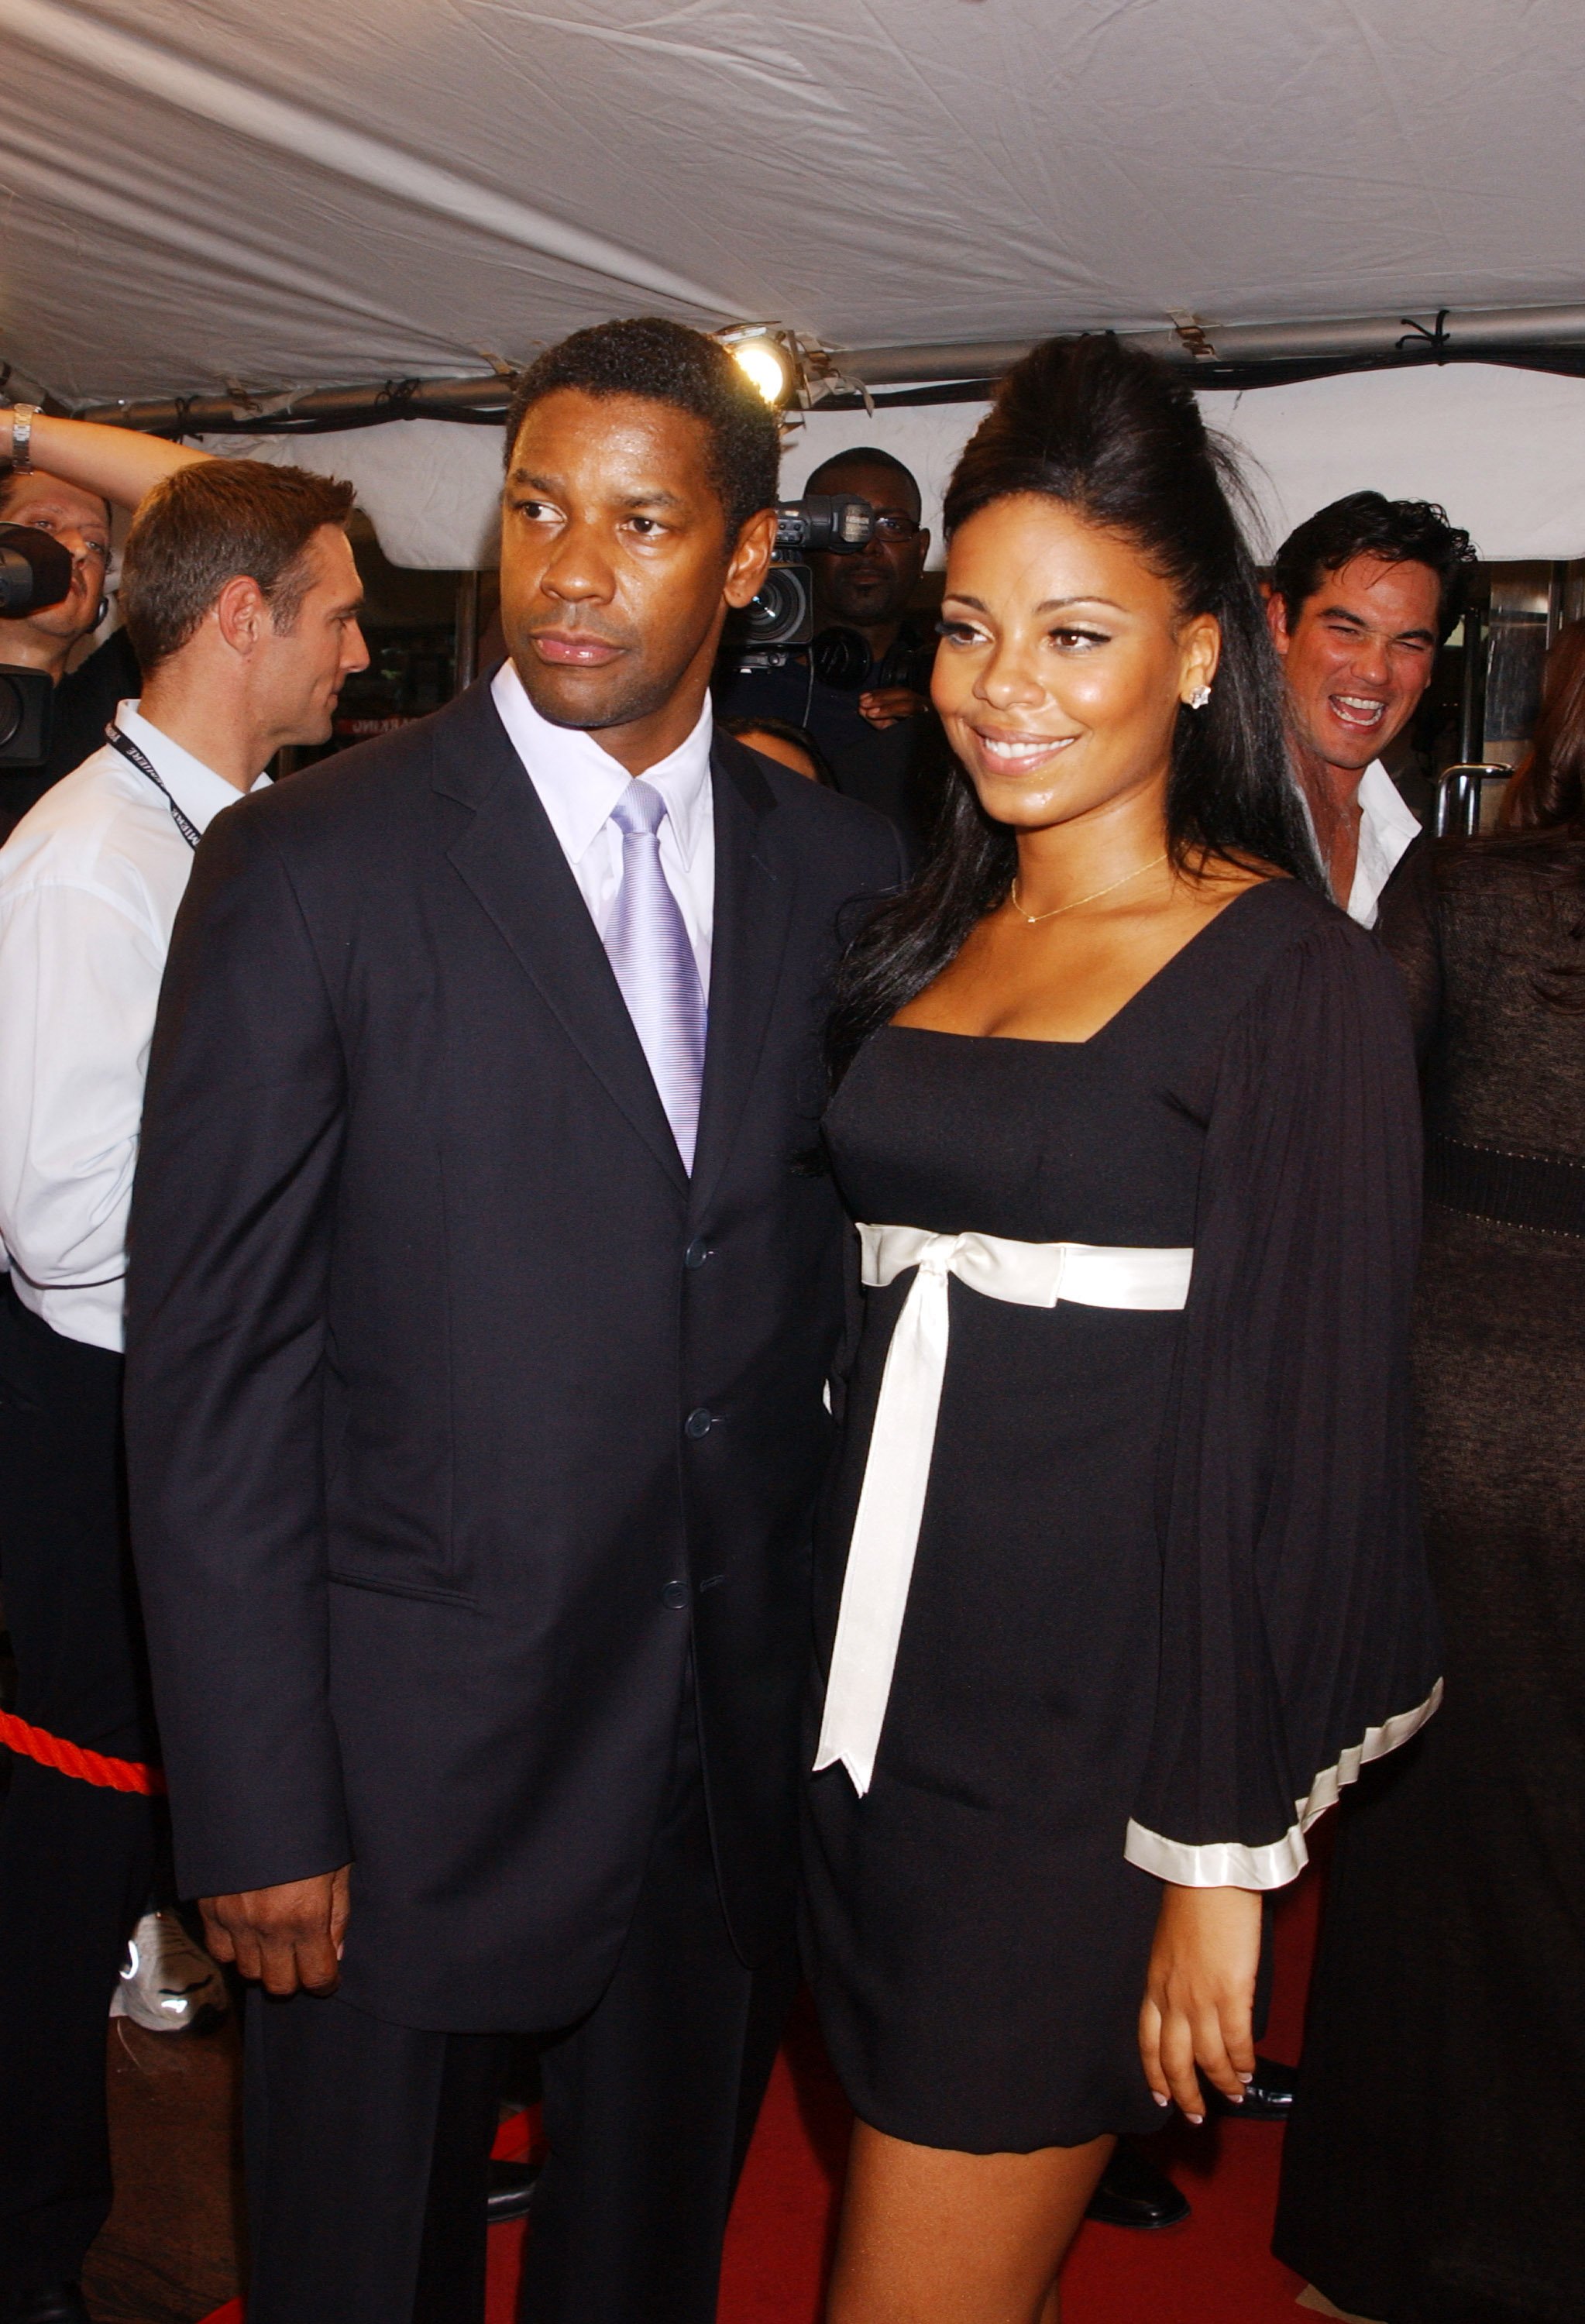 Denzel Washington and Sanaa Lathan on September 7, 2003 in Toronto, Ontario, Canada | Source: Getty Images 